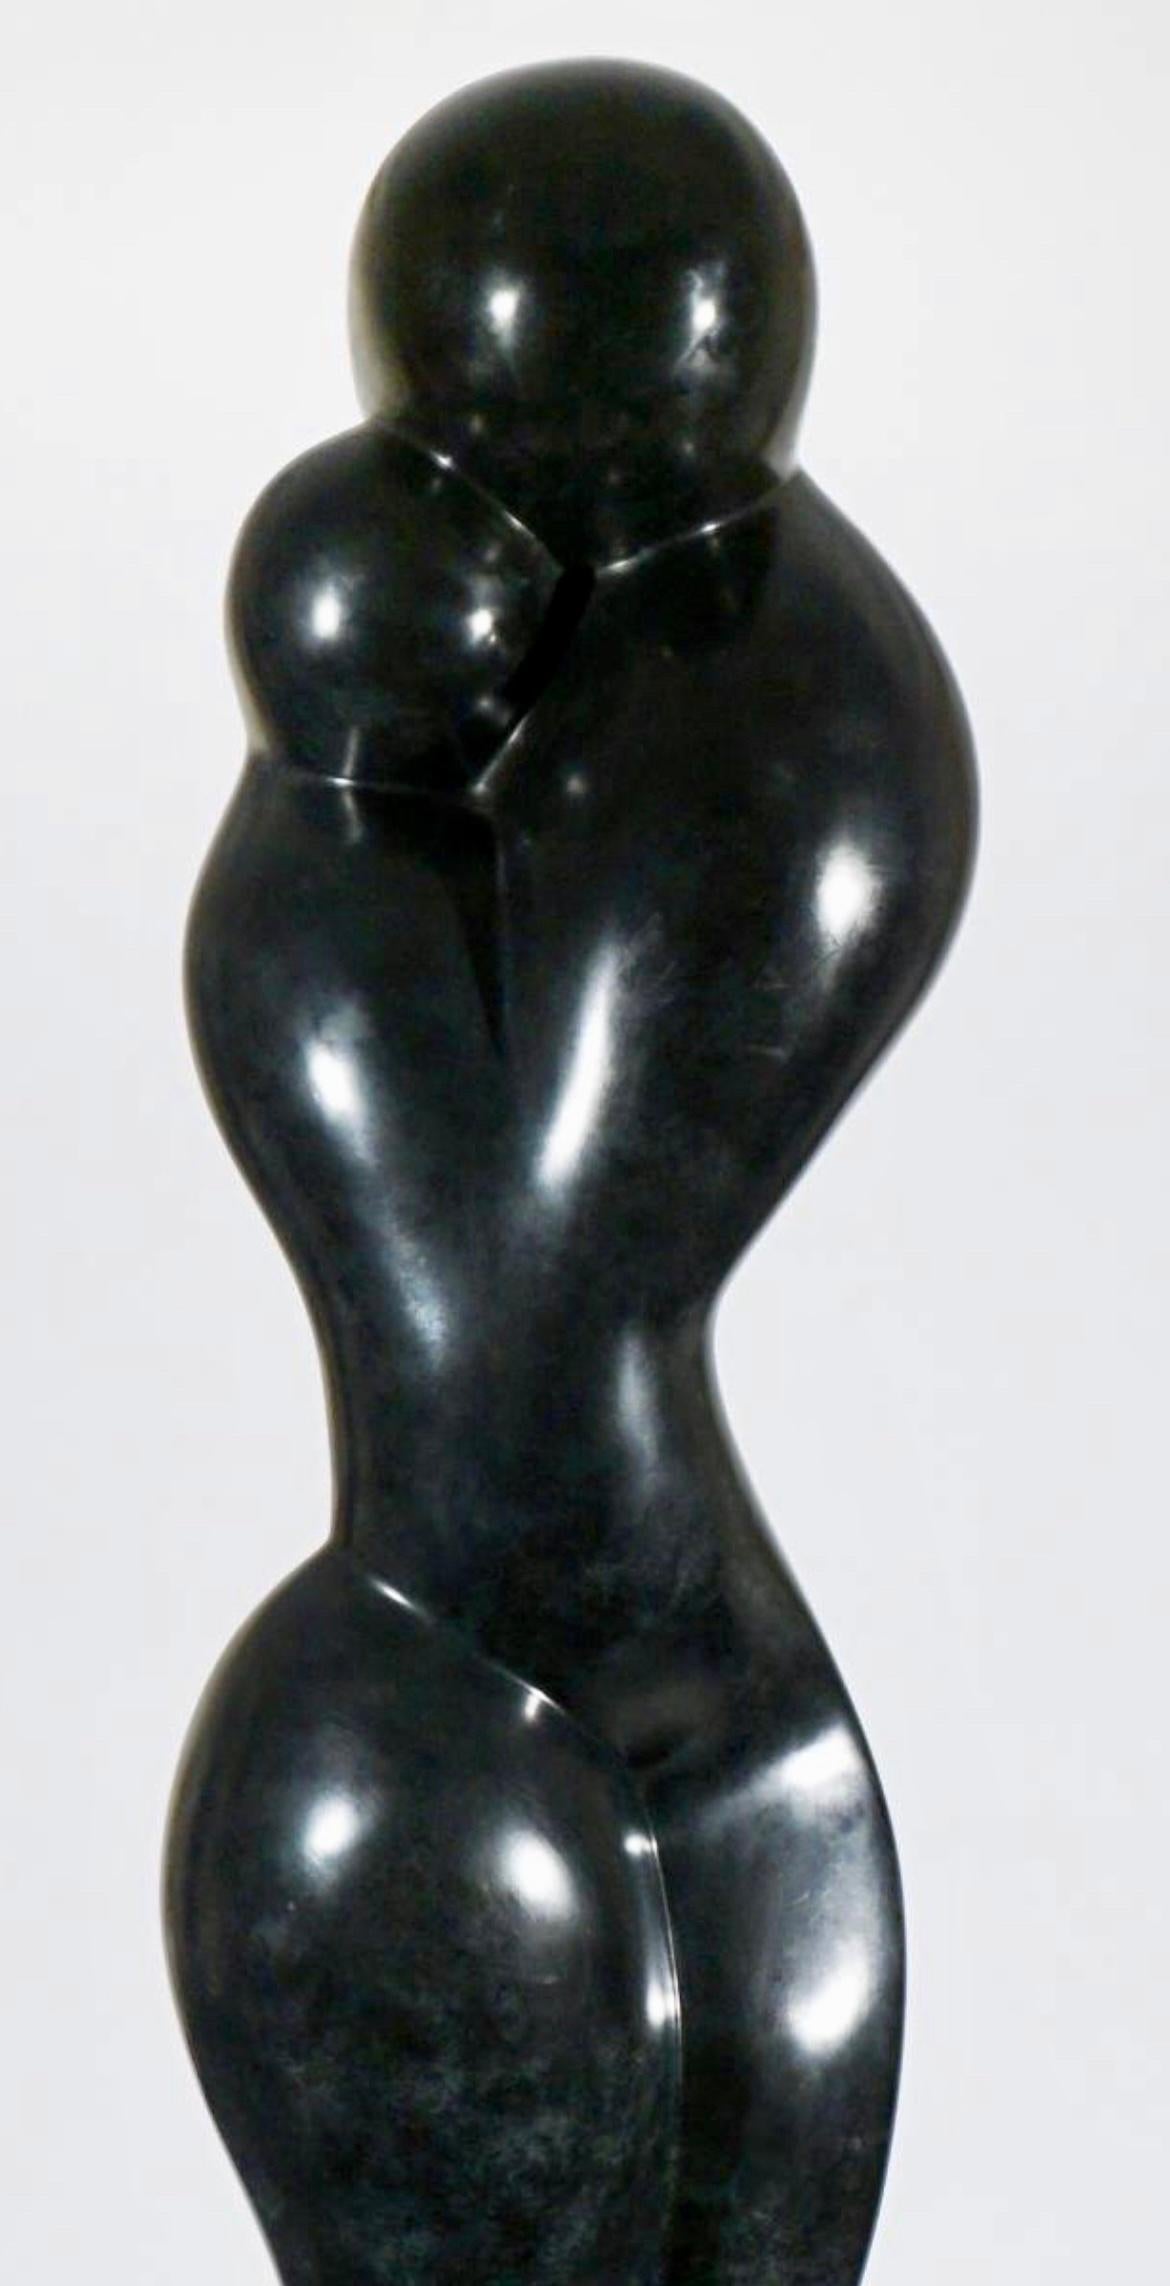 Bronze on polished stone base, signed and edition numbered.  The base was most likely produced by the sculptor to allow the piece to smoothly rotate.  The sculpture stands 80.5